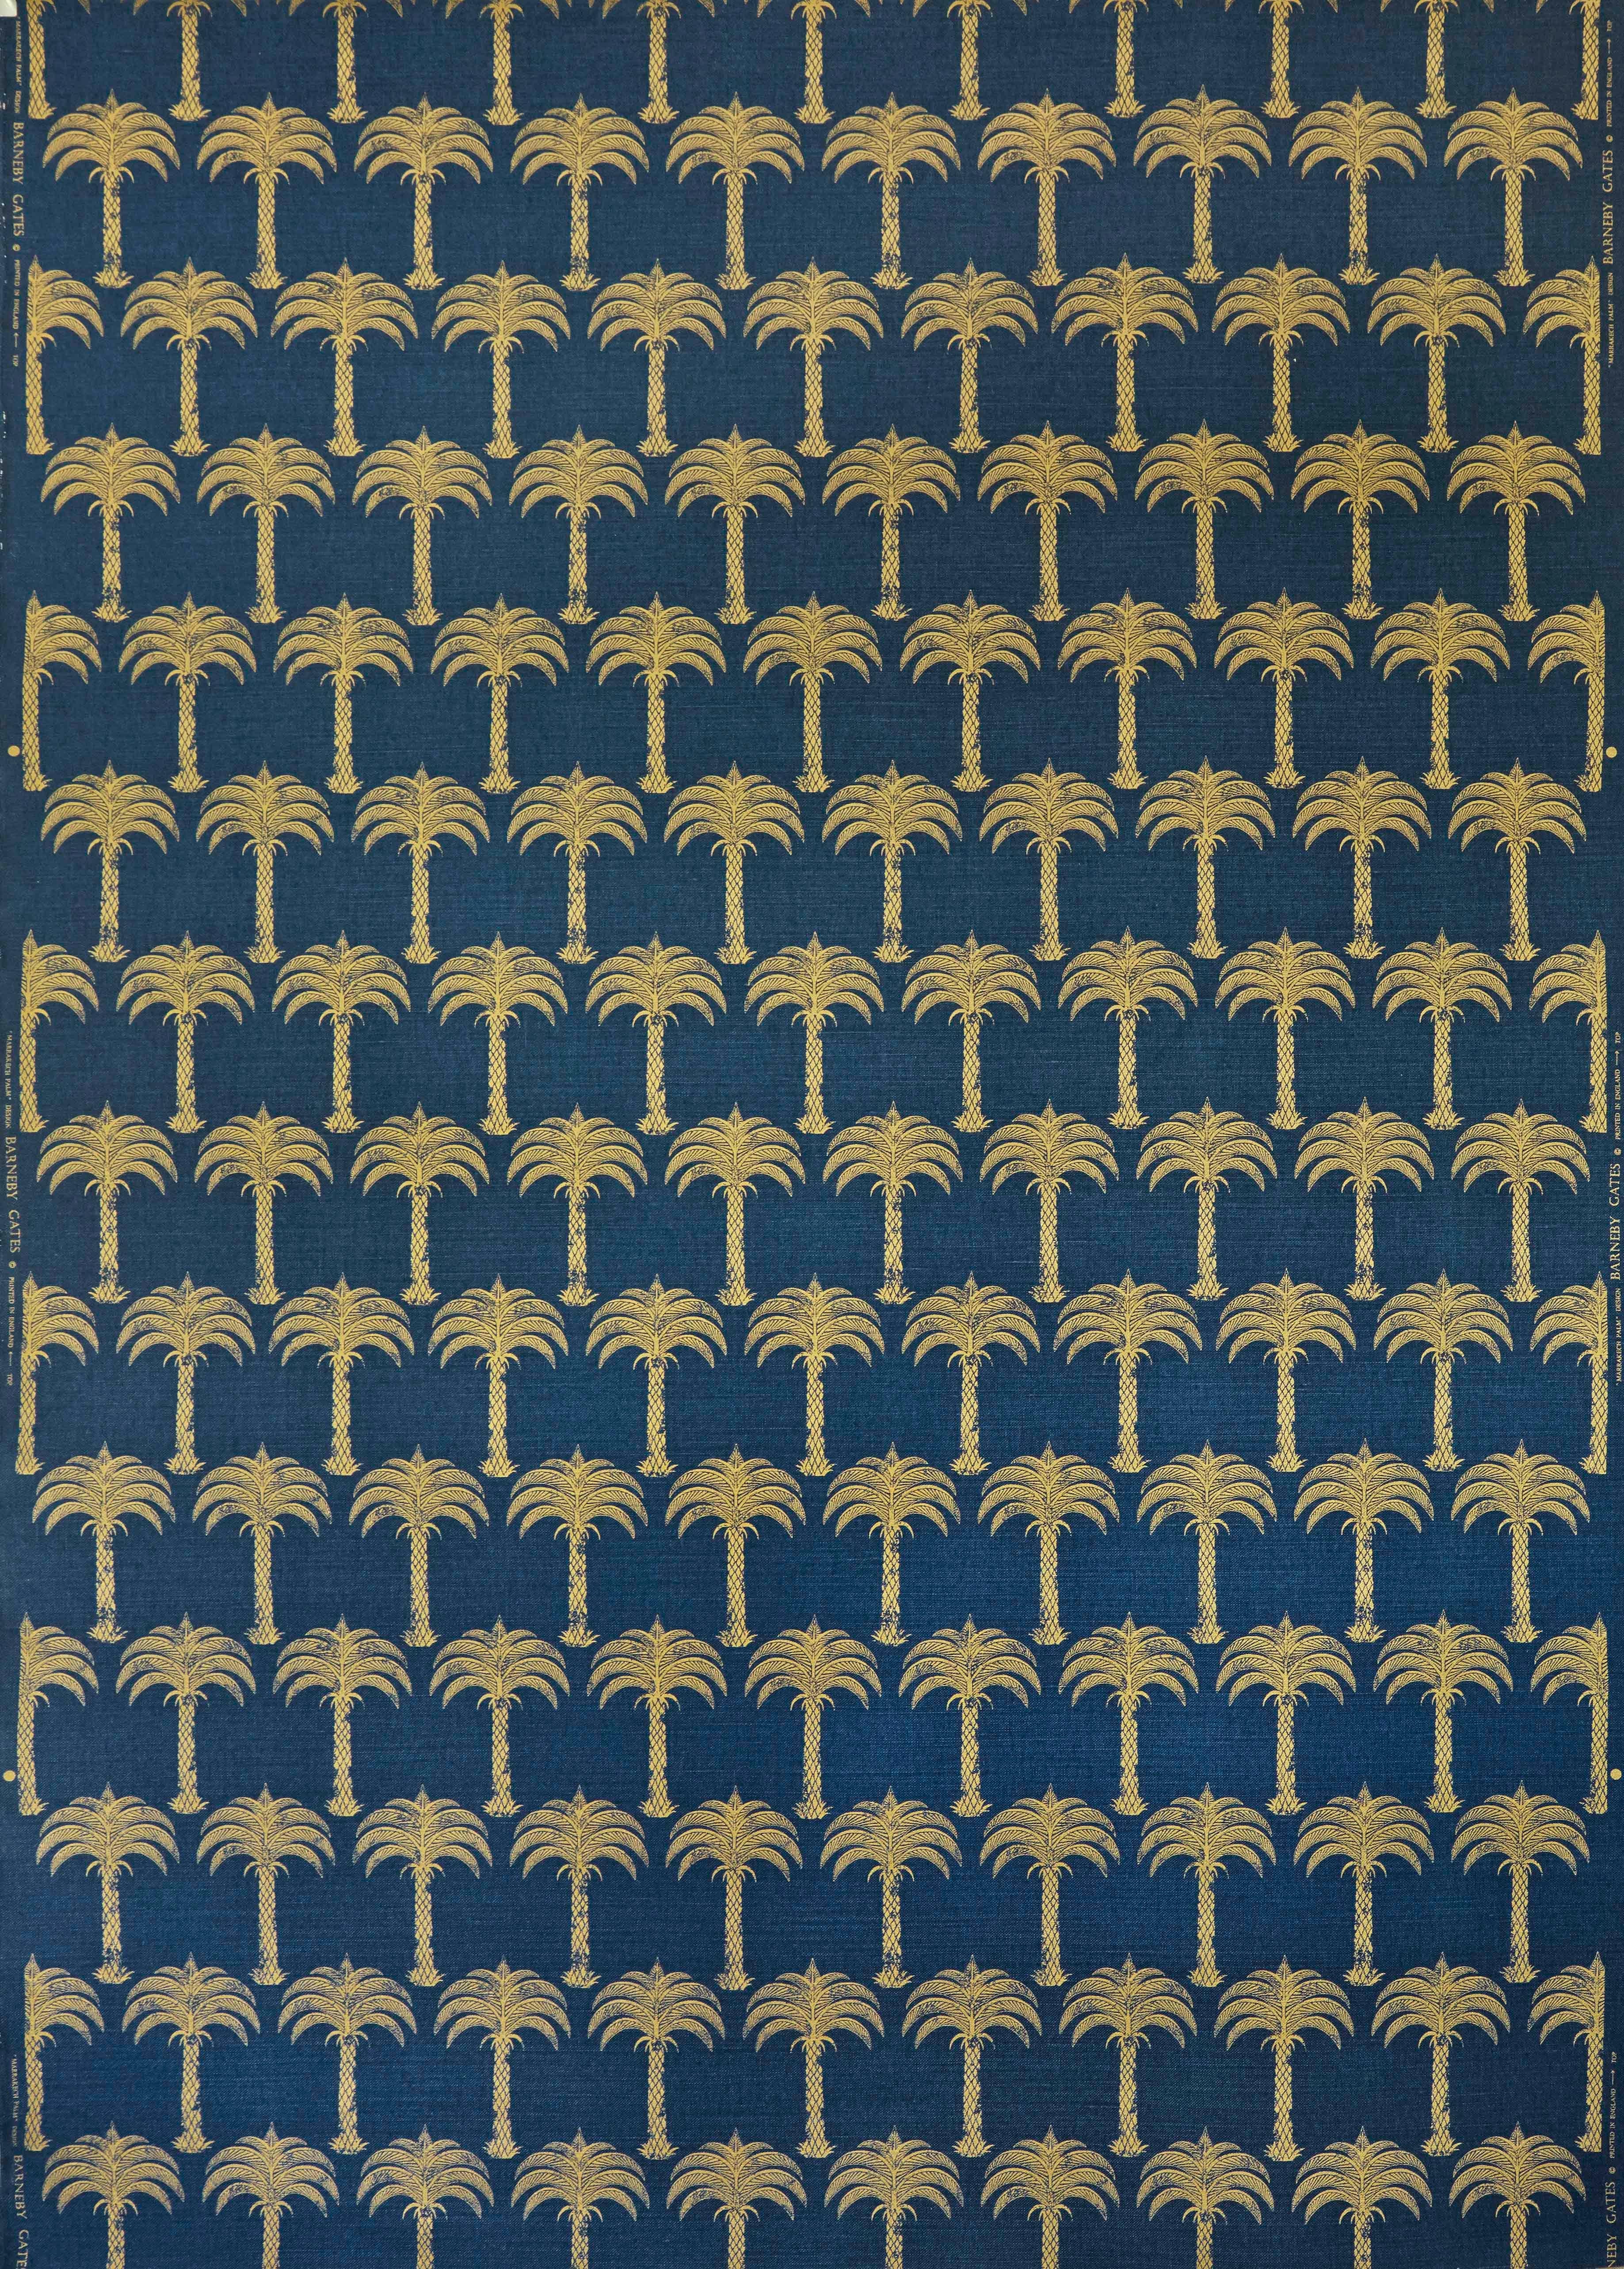 Color: Midnight blue (also available in soft gold or gold on natural)
Trim width: 142cm / 55.90 inches
Pattern repeat: Straight match
Match length: 30.5 cm / 12 inches
Composition: 53% linen, 47% cotton
Usage: General domestic upholstery.

Sold per